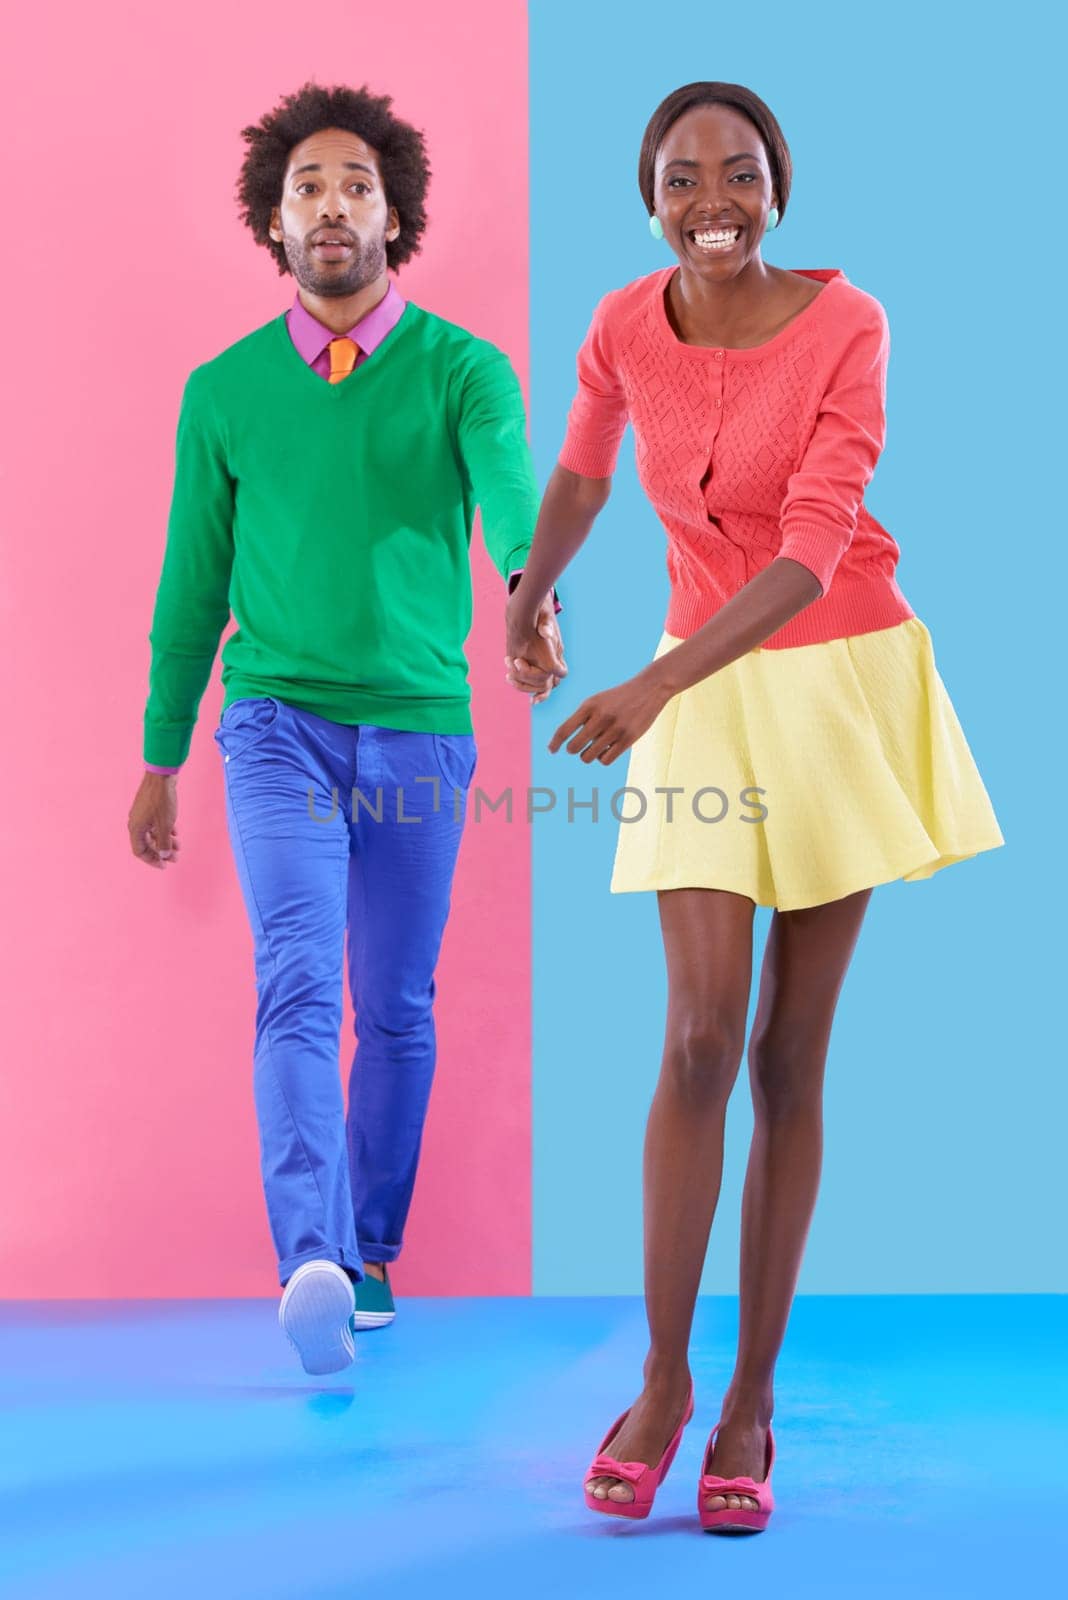 Couple, walk and holding hands with fashion in portrait, studio or creative aesthetic on background. Excited, woman and man together with colorful retro style, unique clothes or leading with trust.